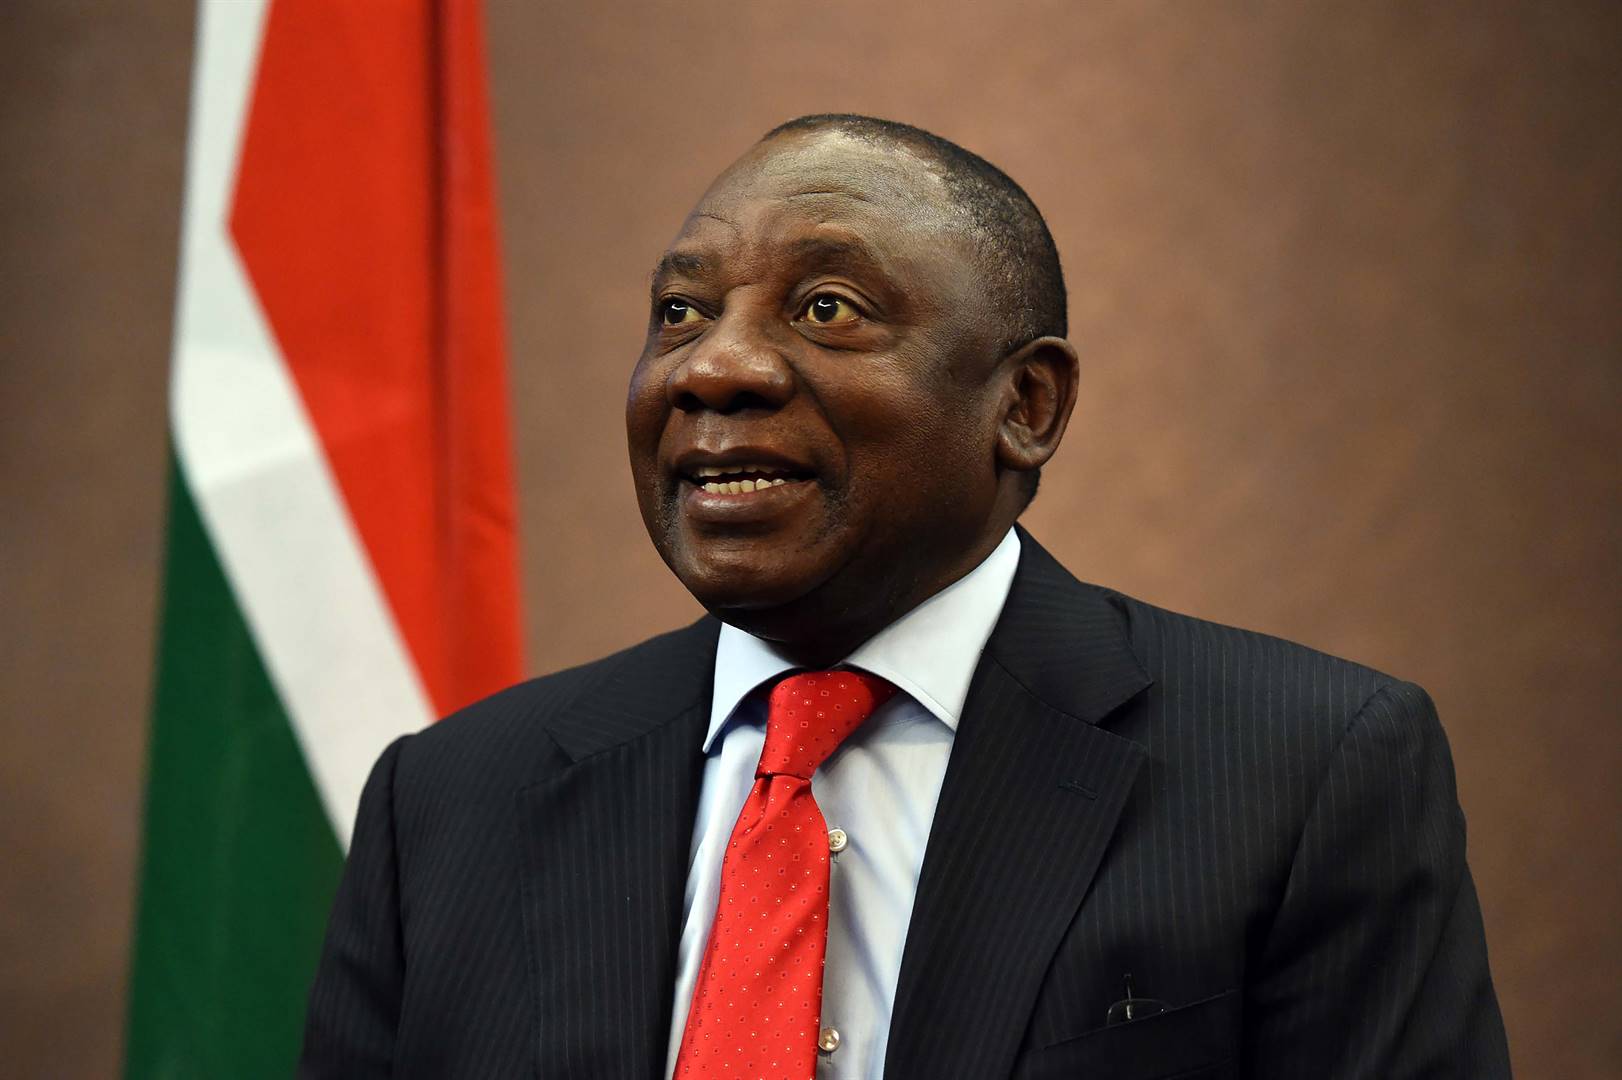 FULL SPEECH | ‘Like the Springboks, we have the determination to overcome any challenge’ – Ramaphosa | News24